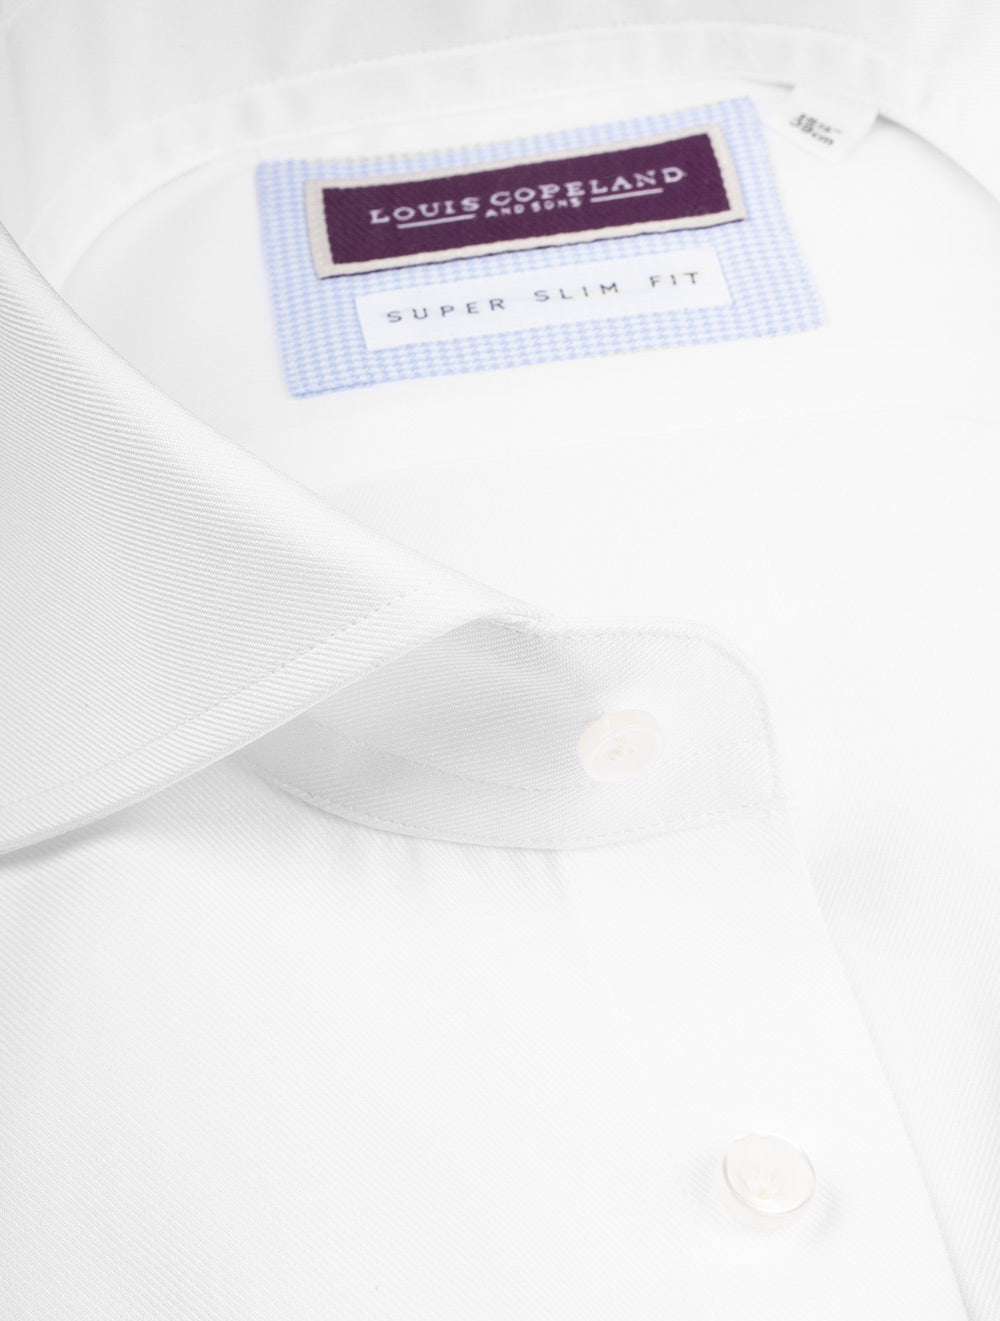 The Louis Copeland Superslim Double Cuff Shirt